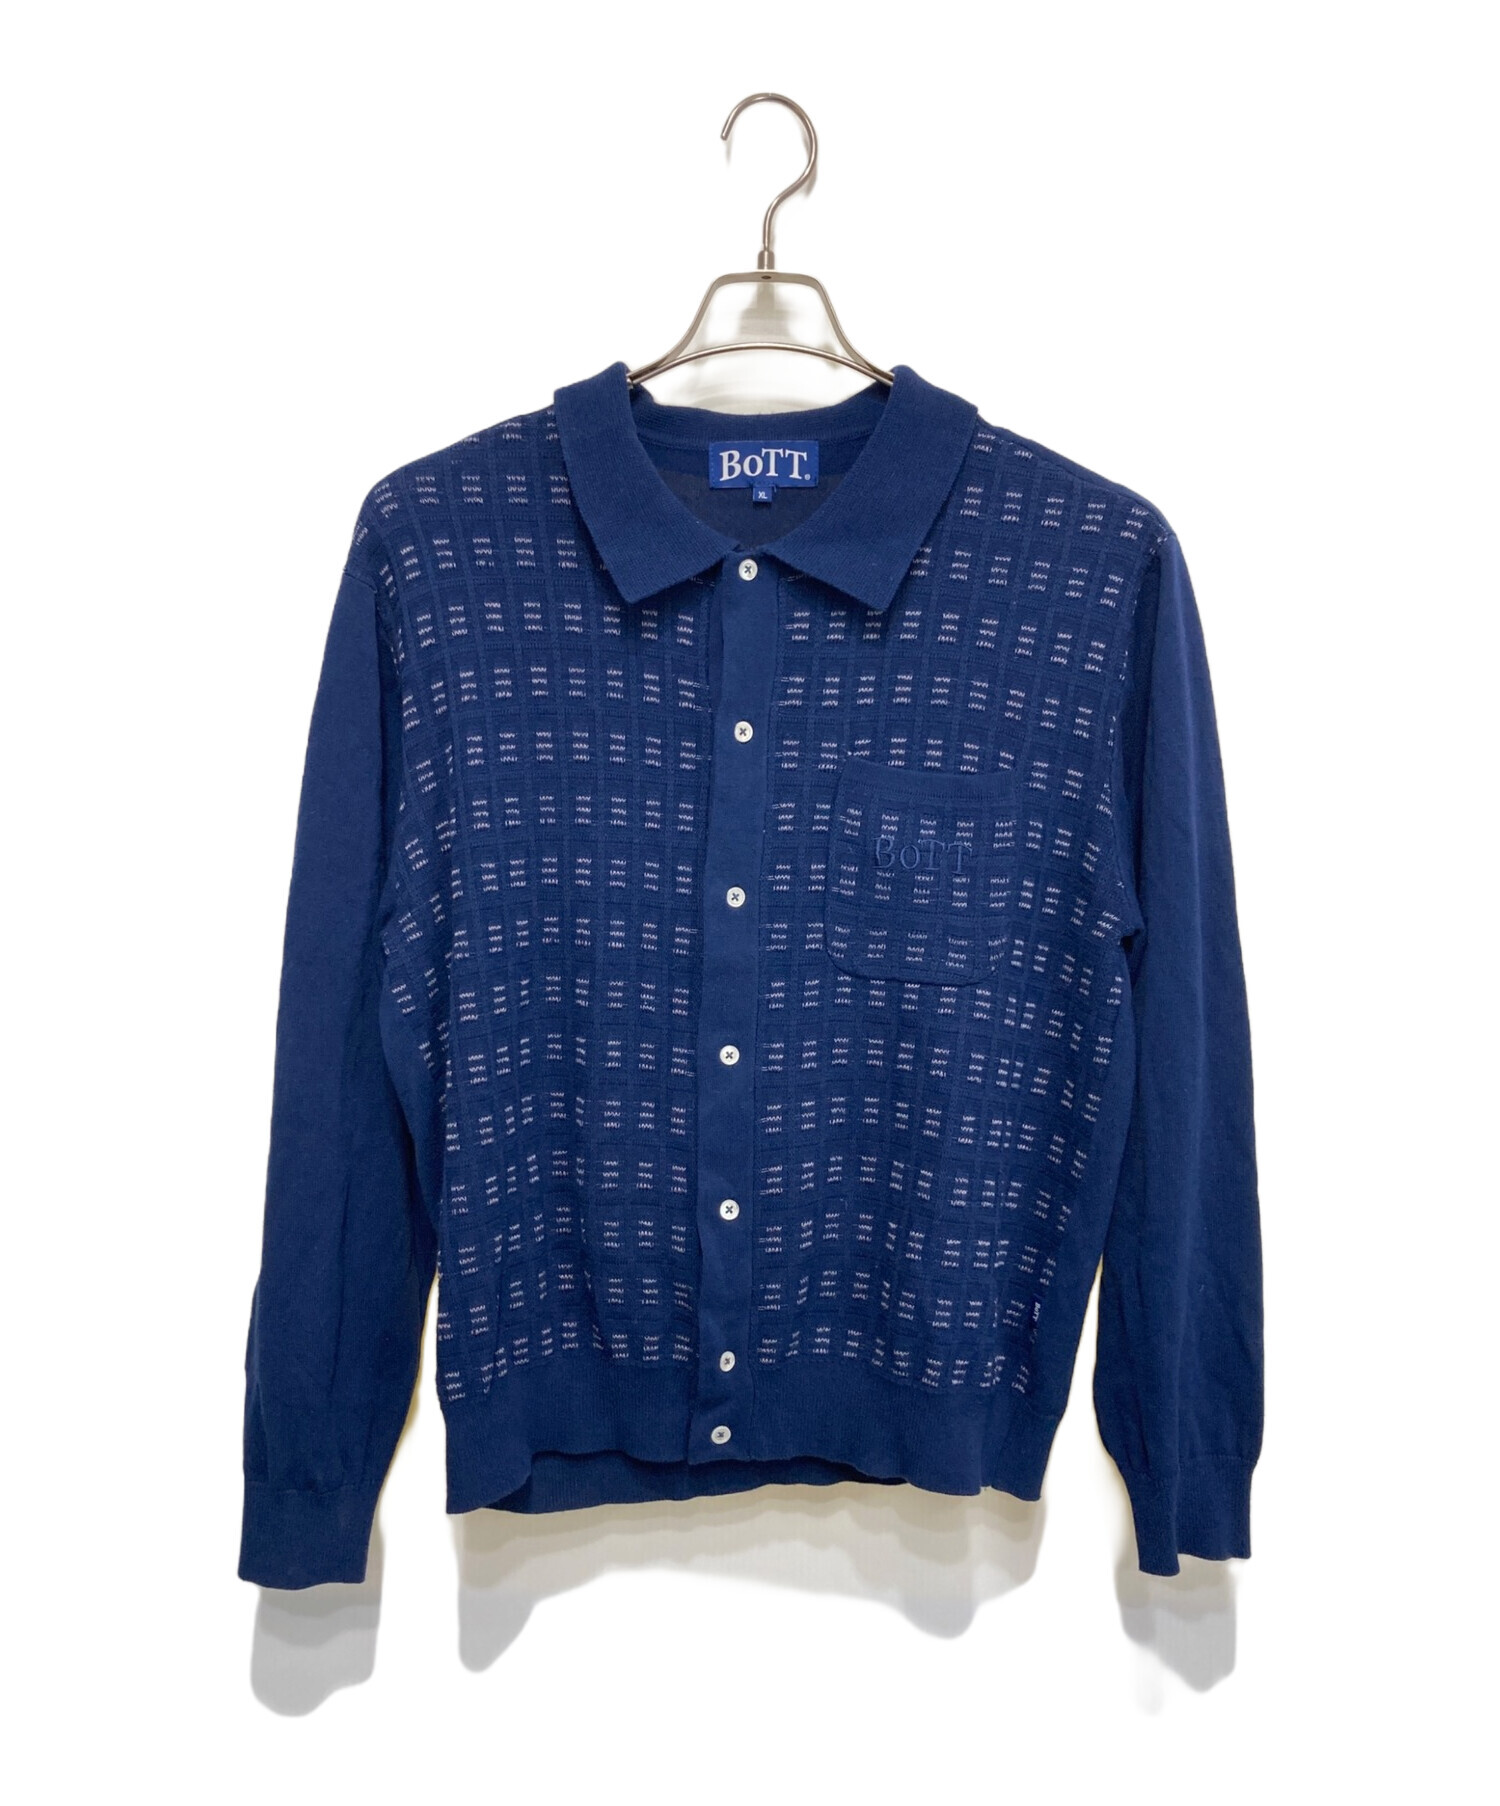 BoTT/ボット Button Down Knit Polo希望はいくらでしょうか